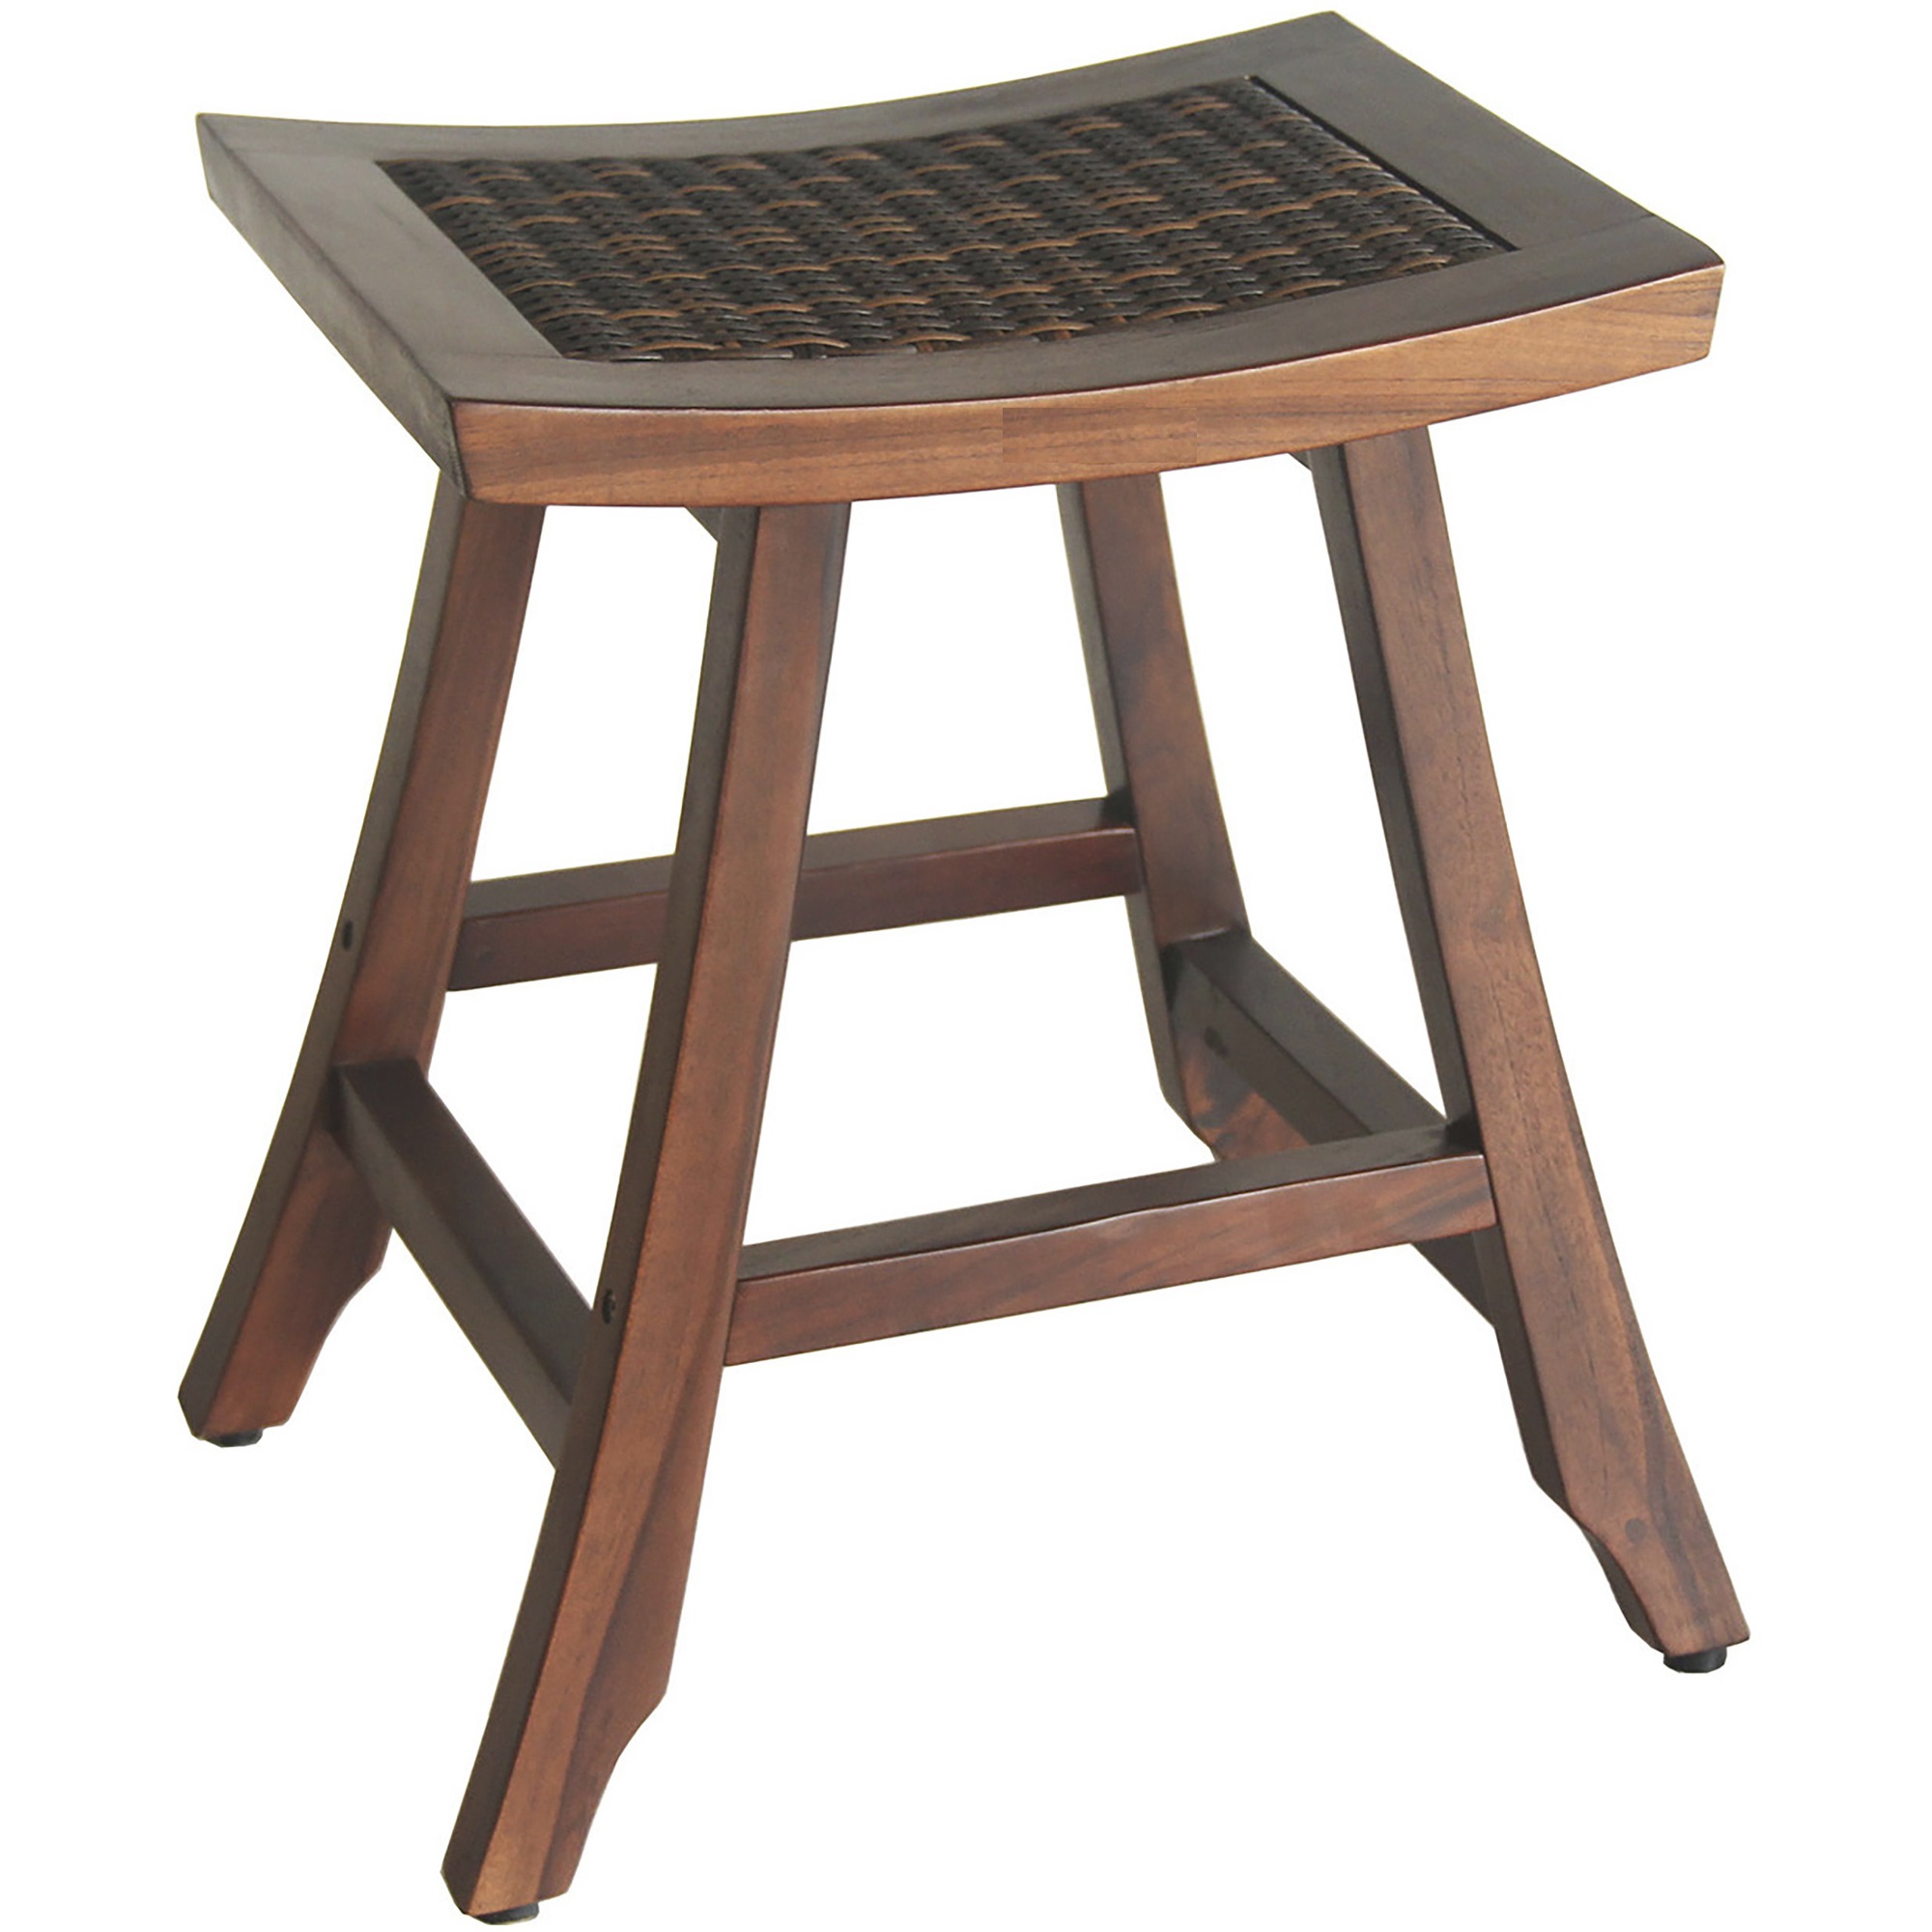 Compact Teak Shower Outdoor Bench with Rattan in Brown Finish